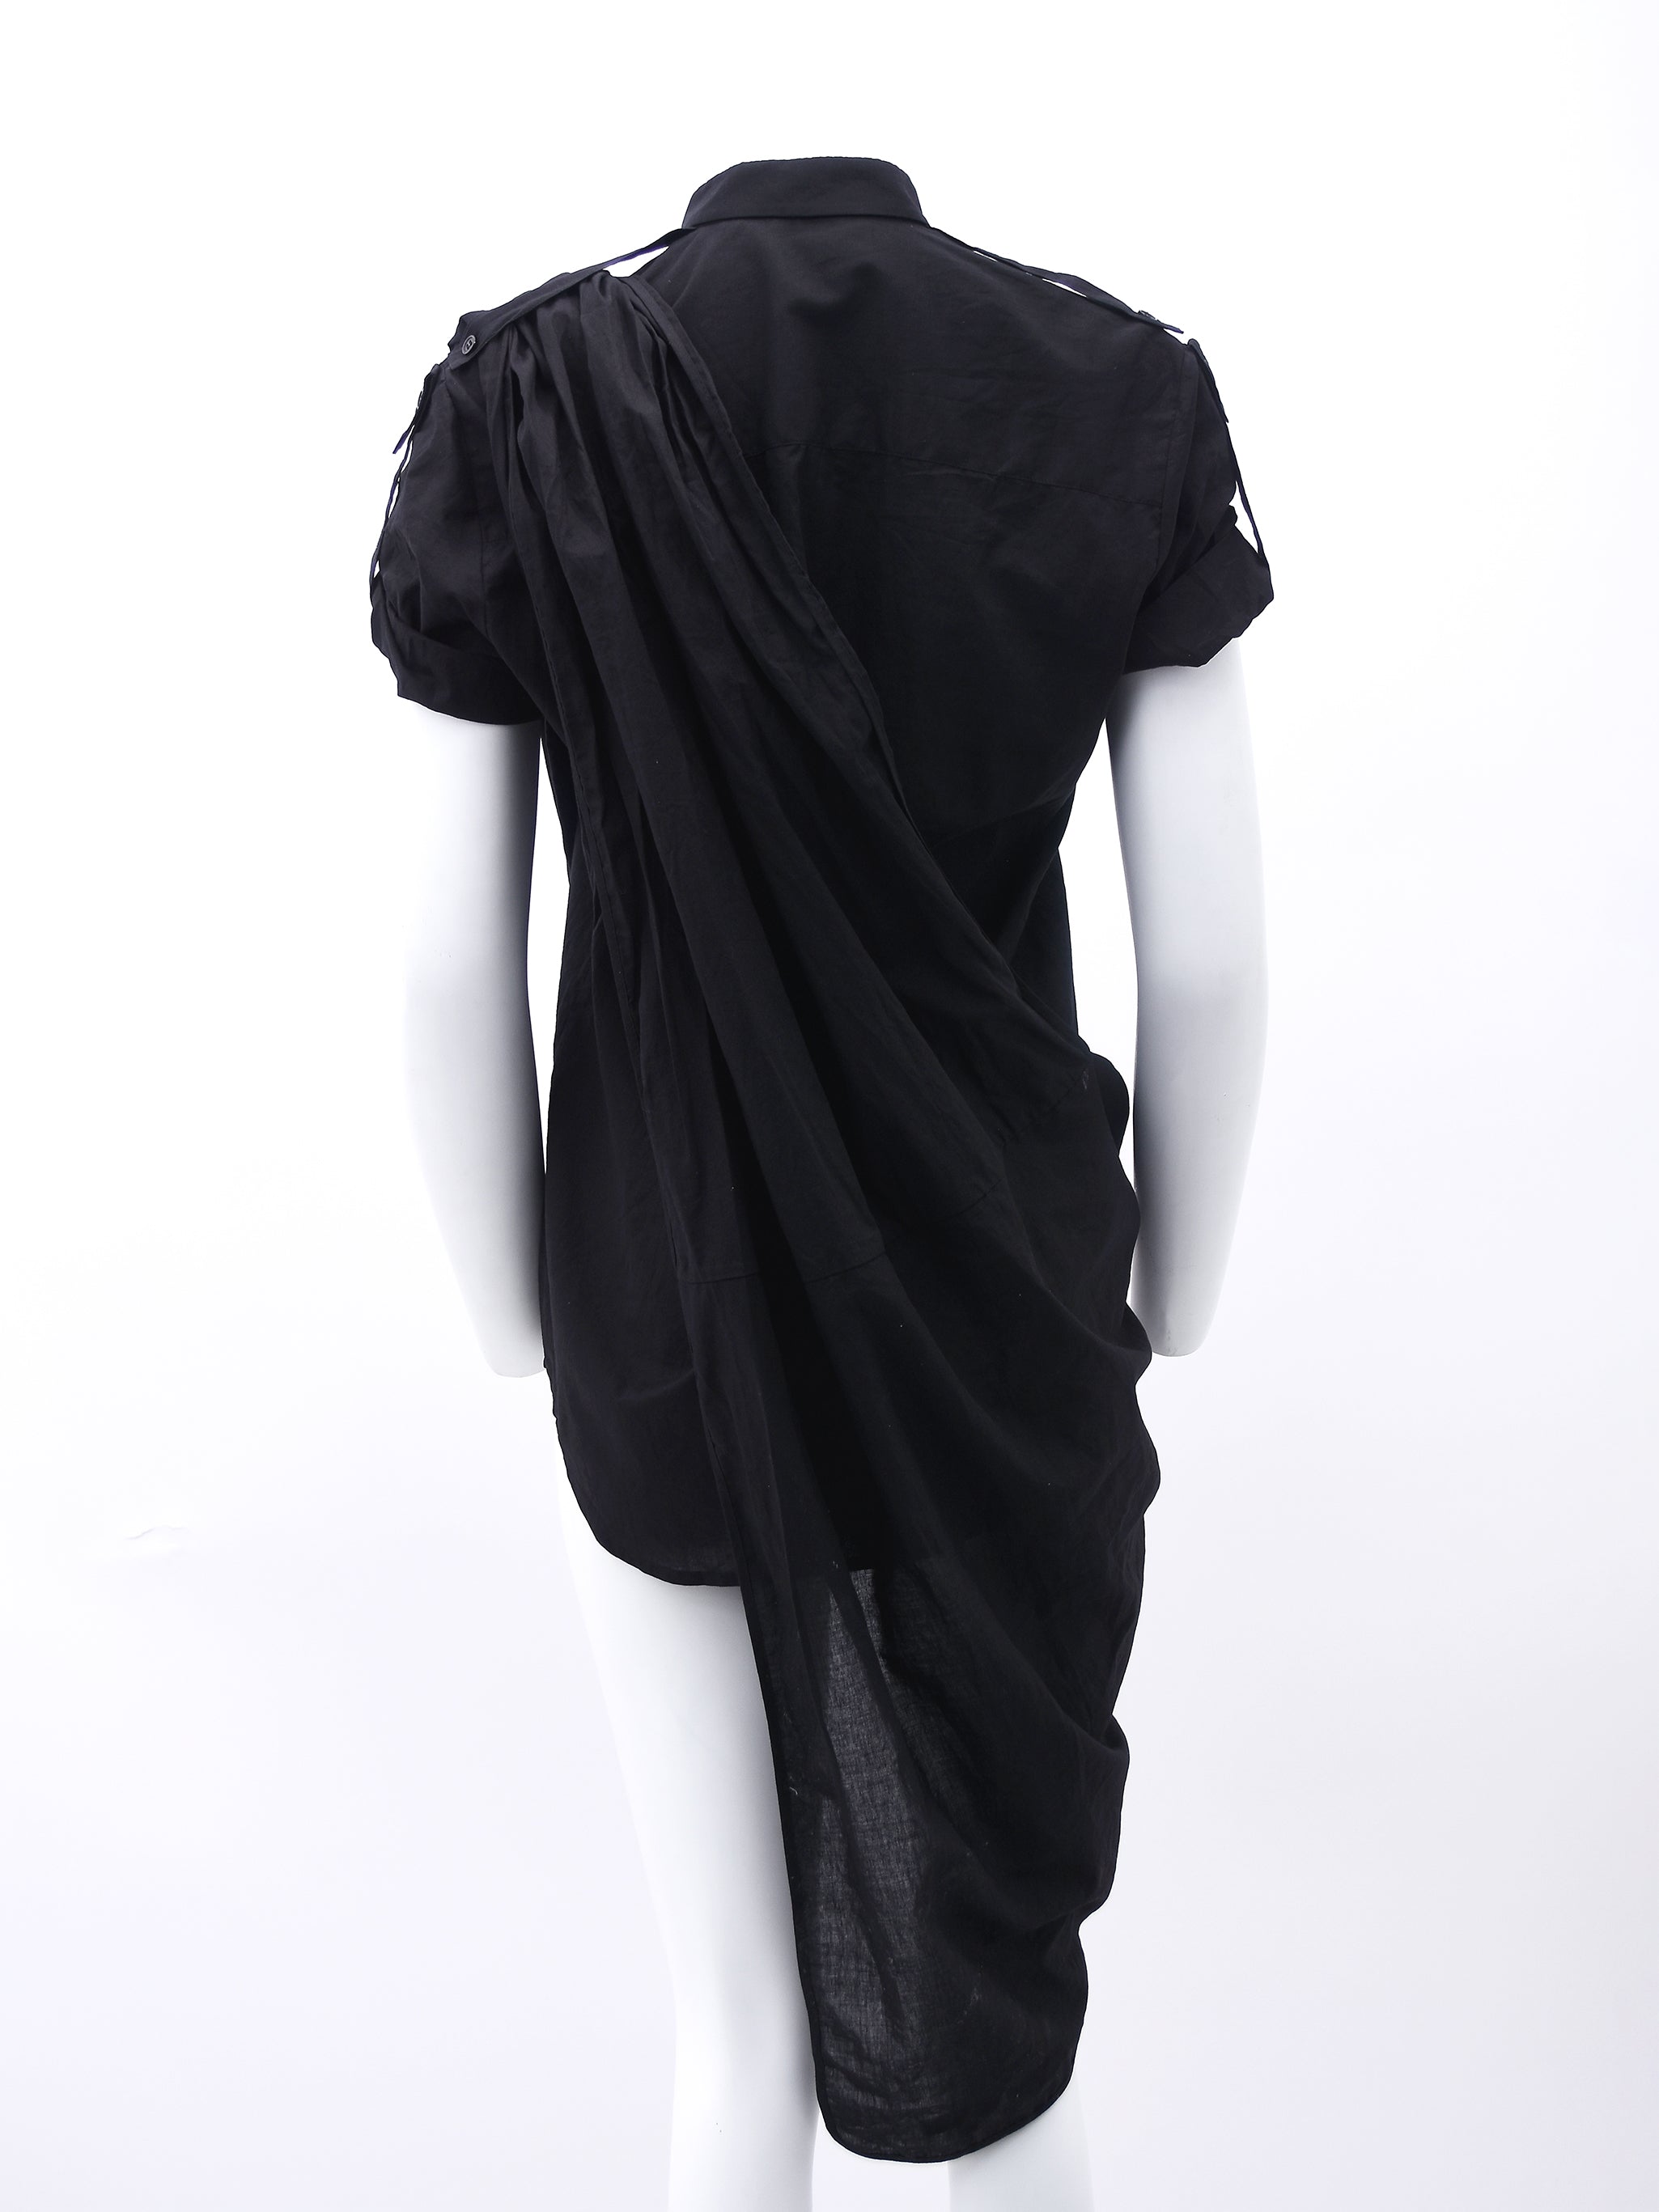 BLACK SHORT SLEEVE SHIRT WITH ATTACHED ASYMMETRIC LAYER